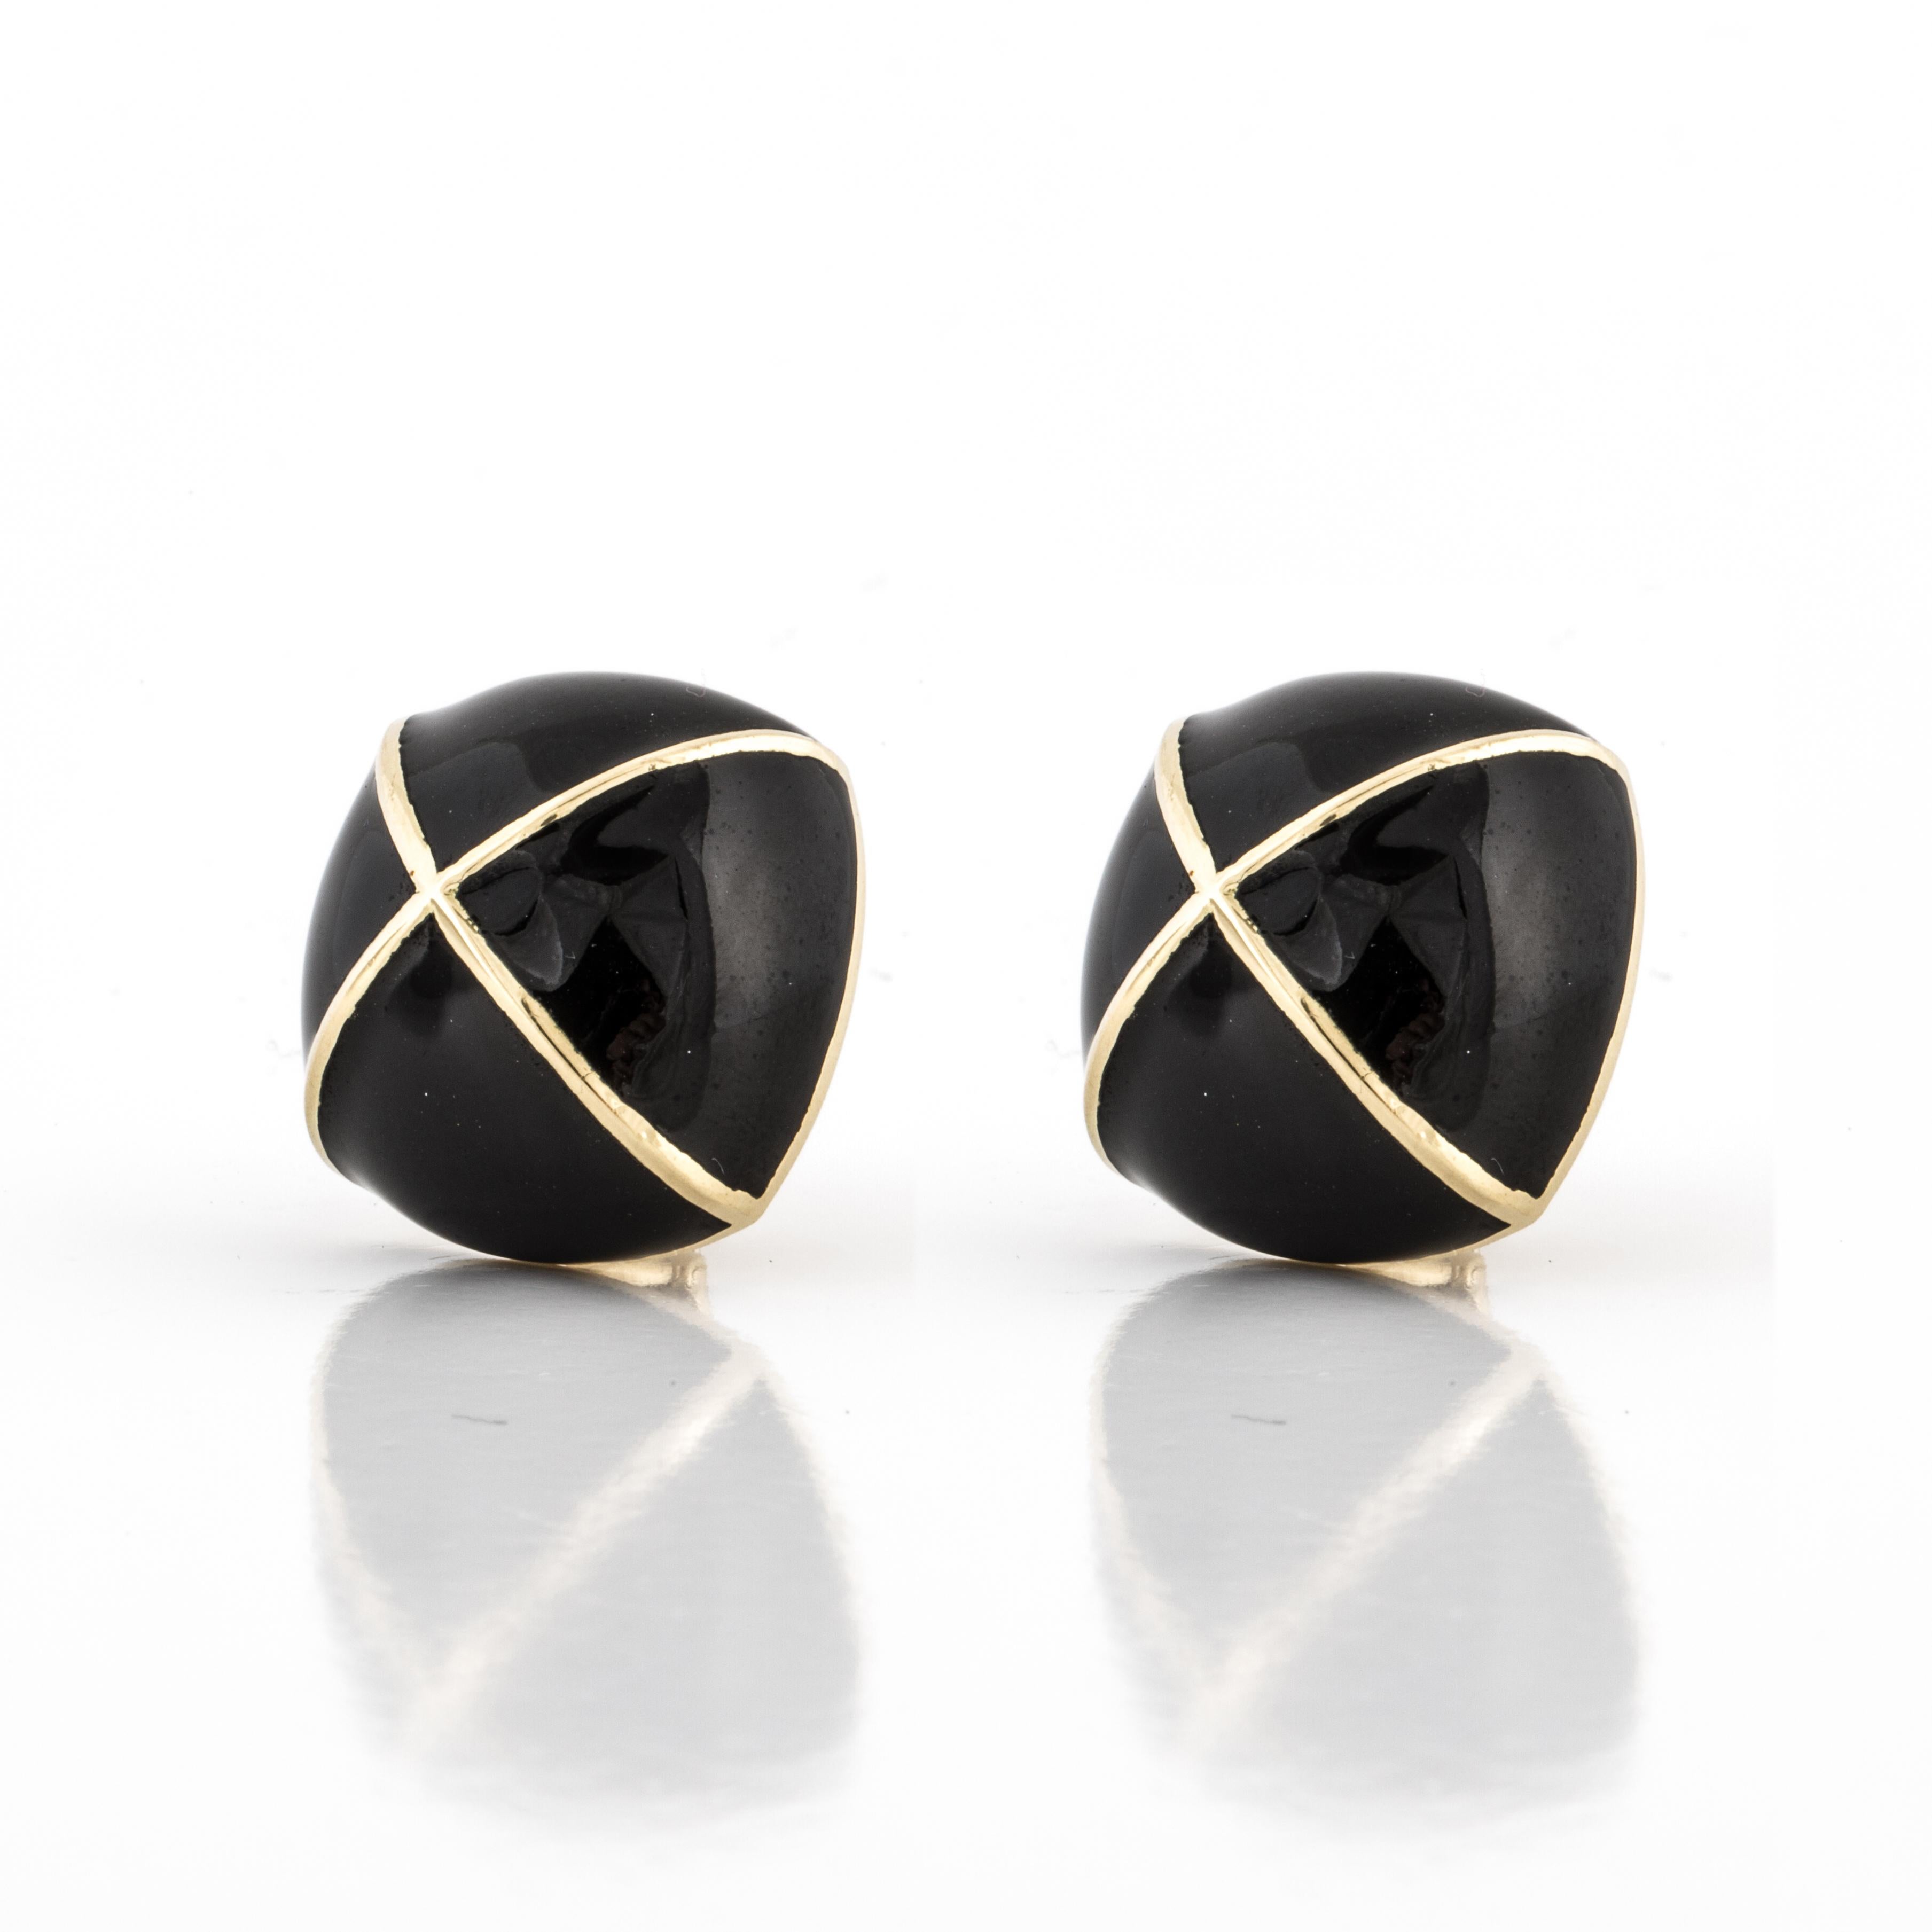 David Webb square cushion earrings in 18K yellow gold with black enamel.  They measure 1 1/16 inches by 1 1/16 inches and stand 5/8 inches off the ear.  Earrings are a clip style.